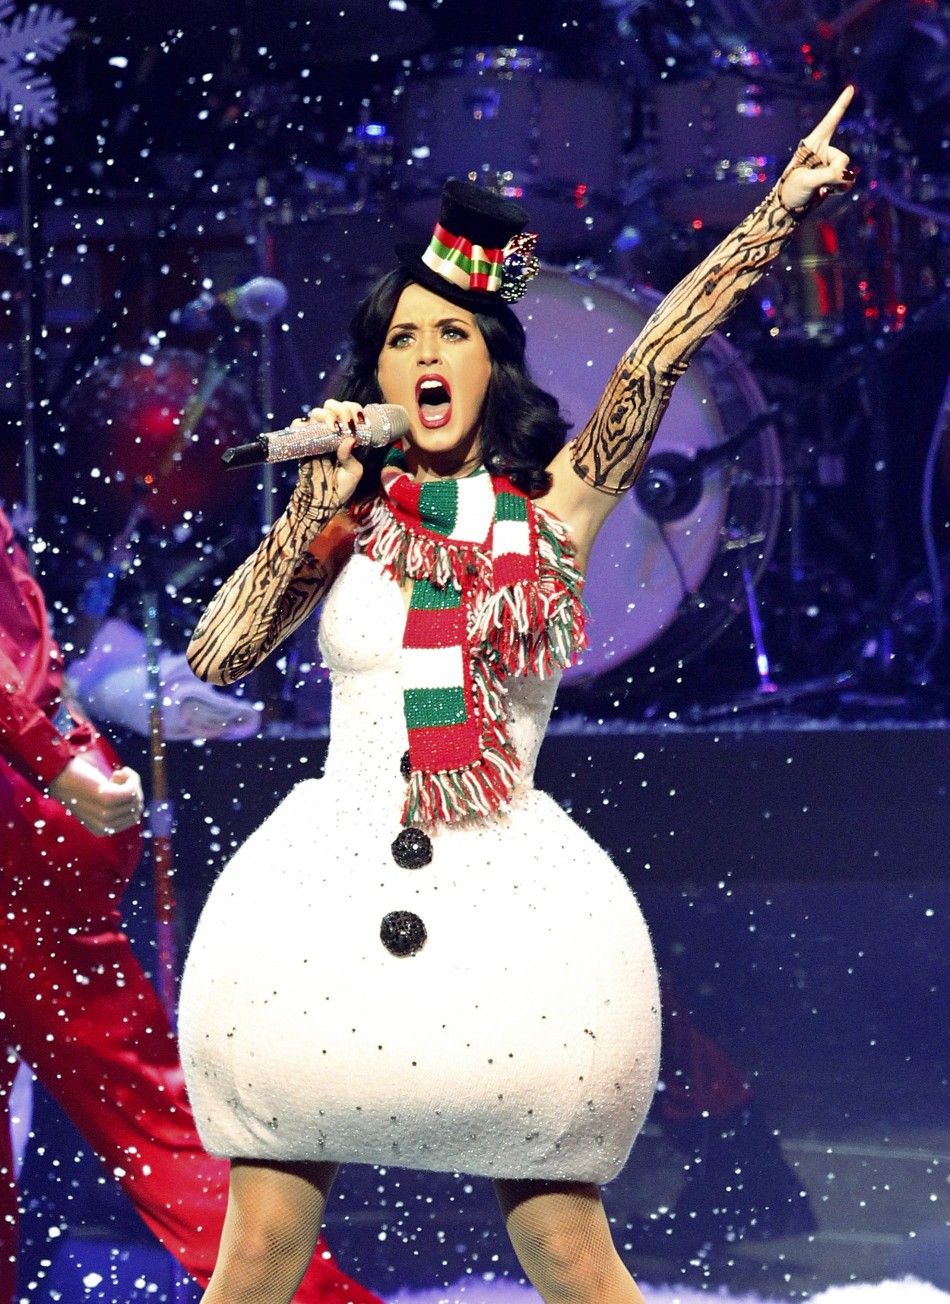 Katy Perry performs at the KIIS FMs Jingle Ball concert in Los Angeles